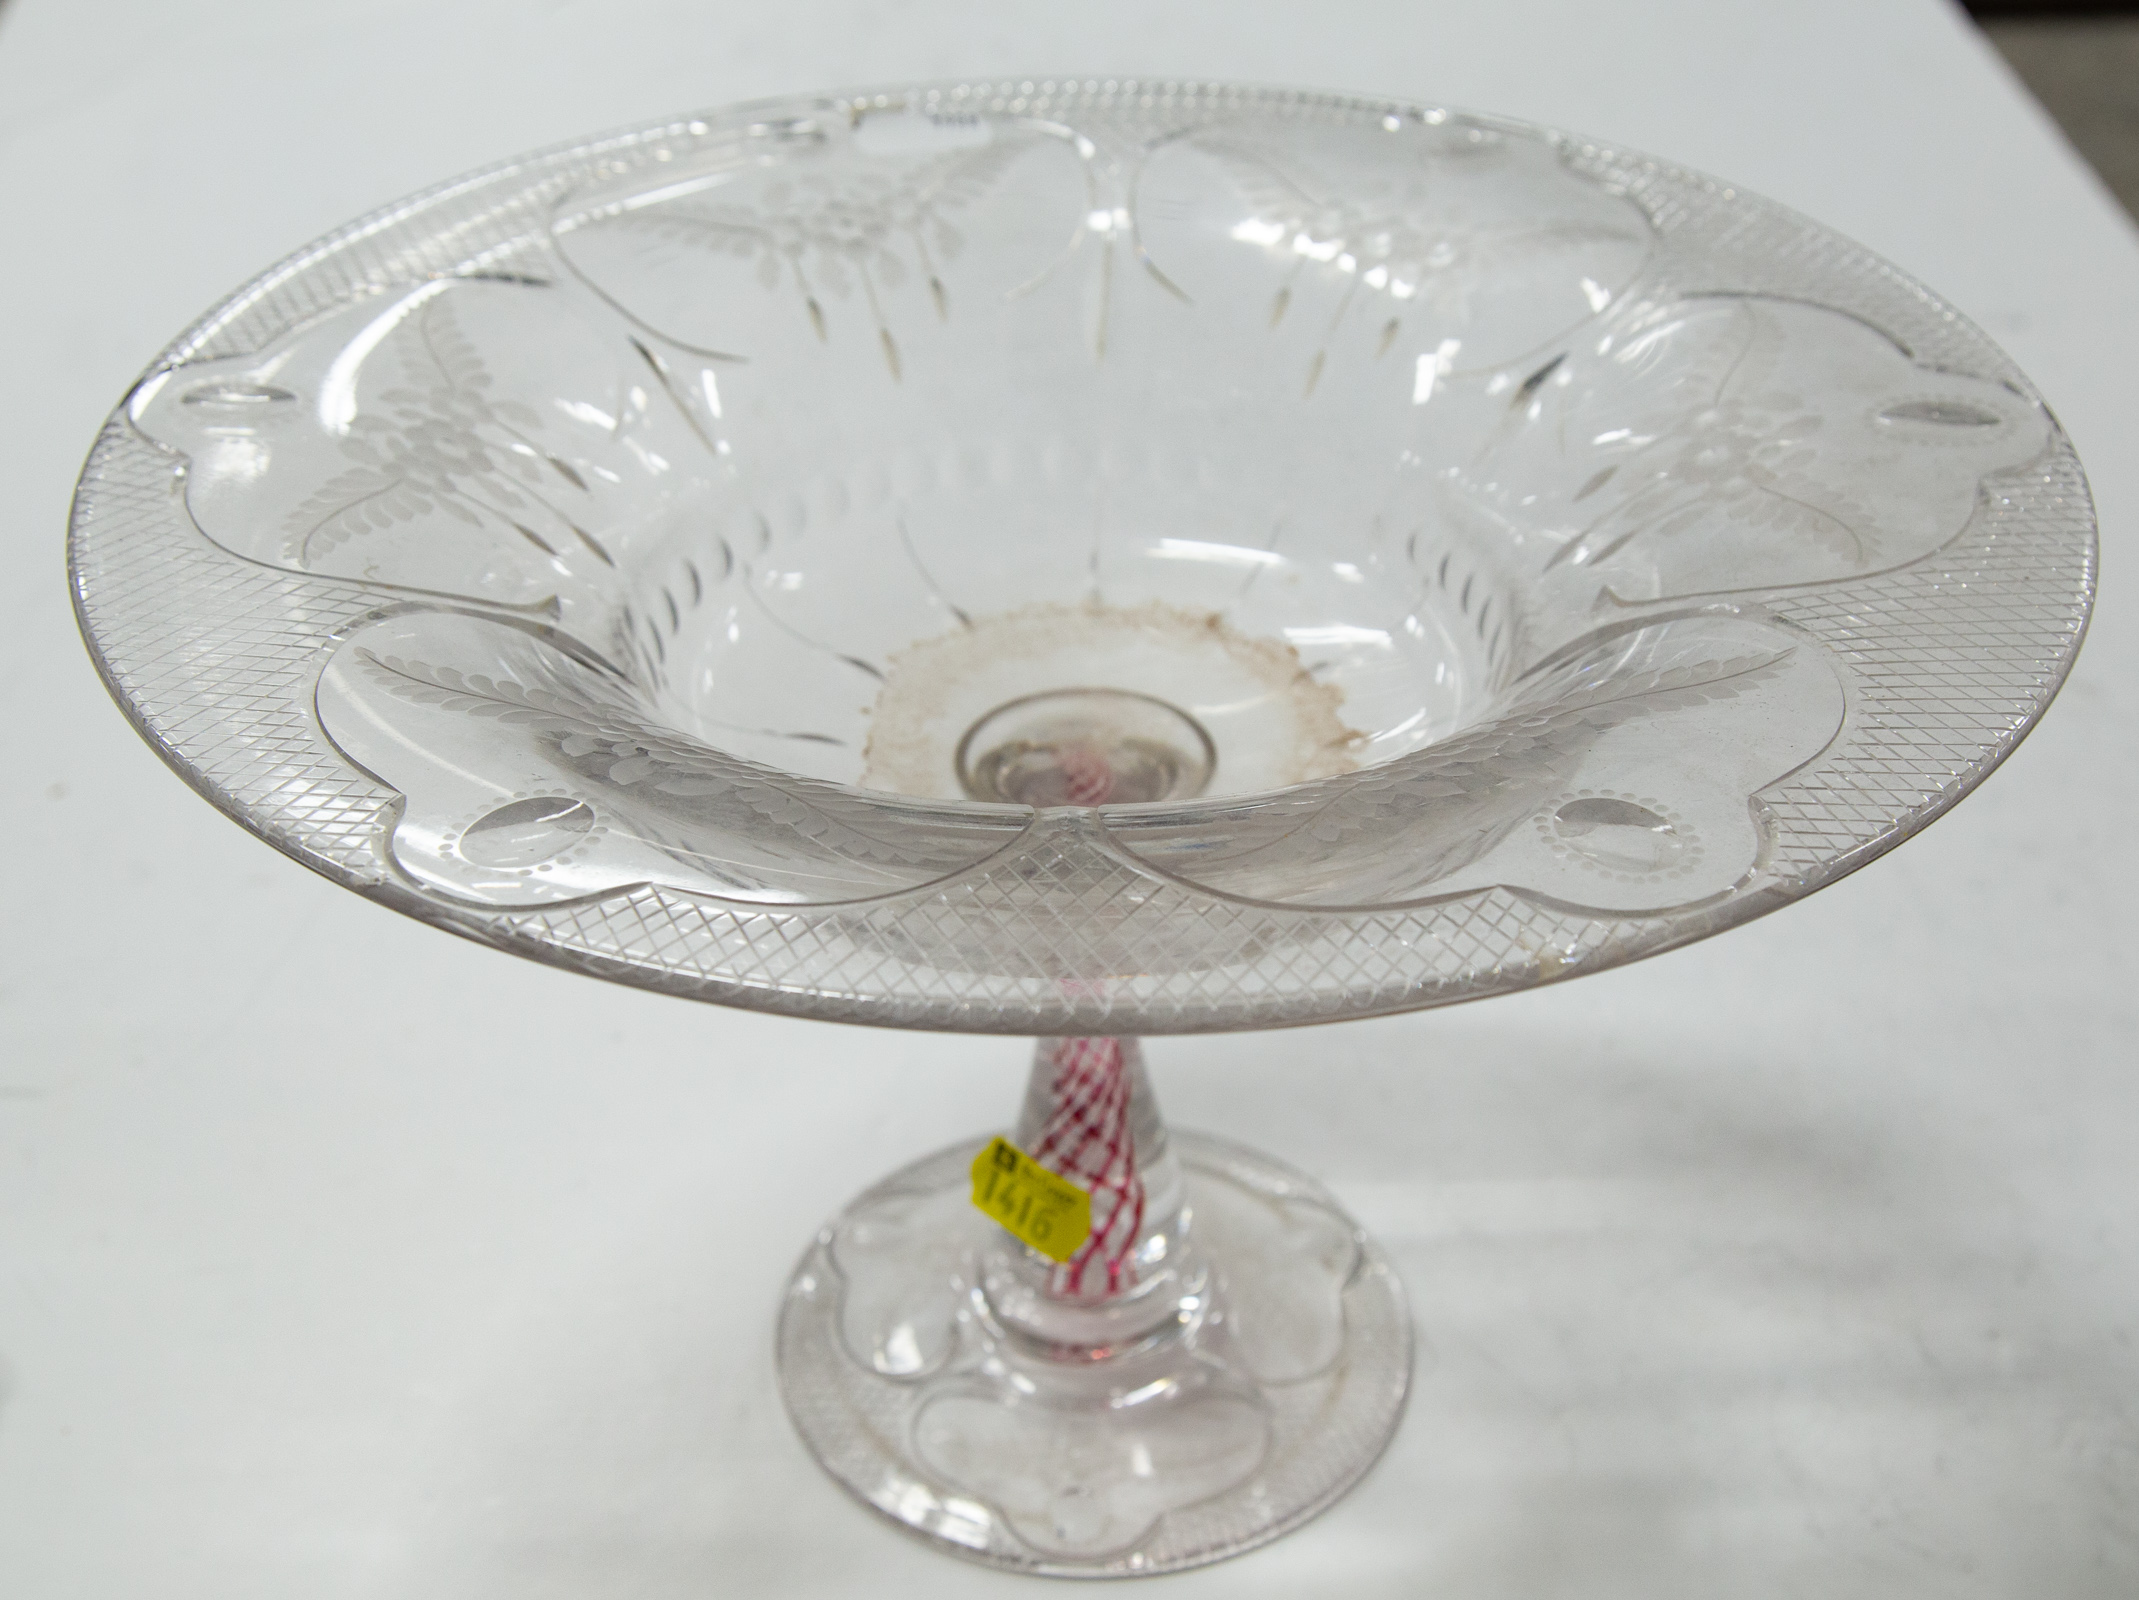 ORNATE ETCHED GLASS COMPOTE Possibly 337a11